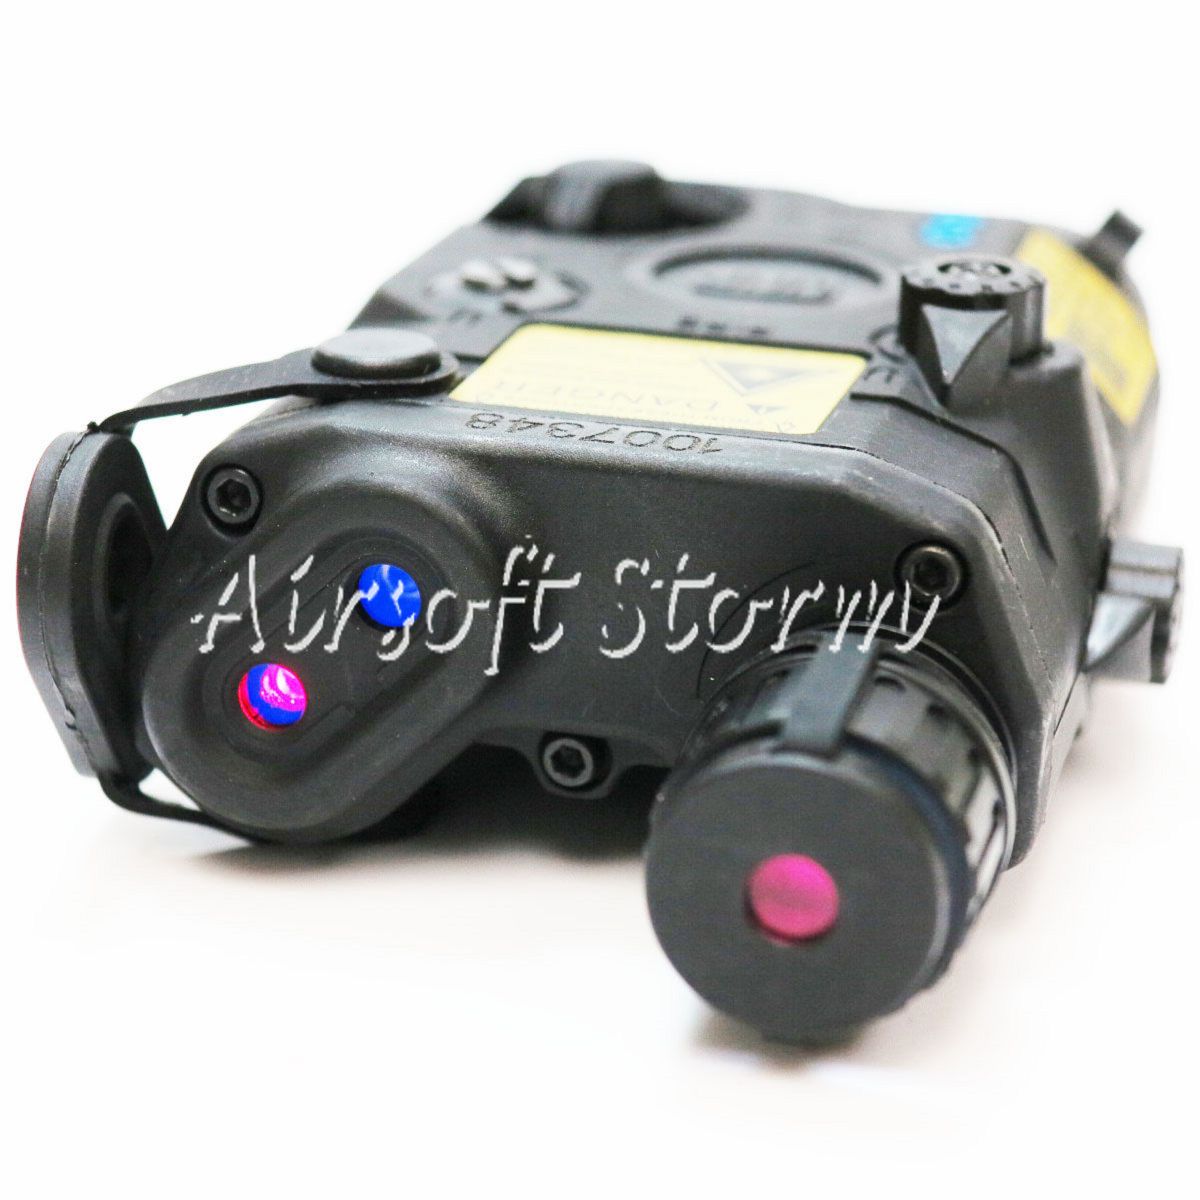 Airsoft Tactical Gear FMA AN/PEQ LA5-C Upgrade Version LED White Light + Red/IR Laser Black